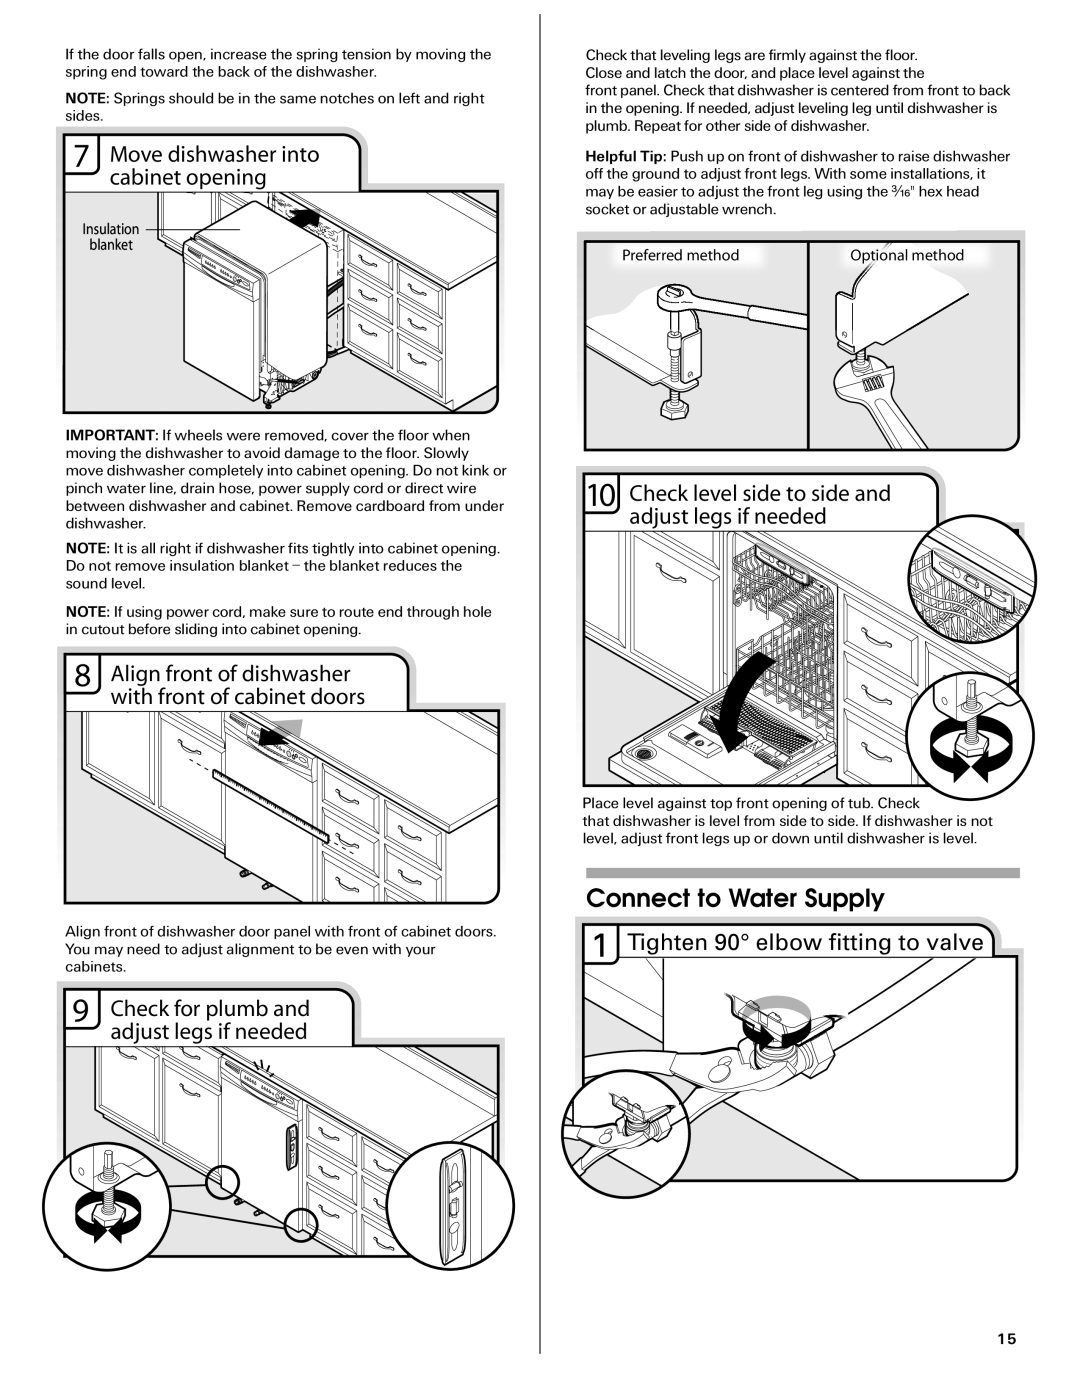 Maytag MDB6709AWW Move dishwasher into cabinet opening, Align front of dishwasher with front of cabinet doors, blanket 